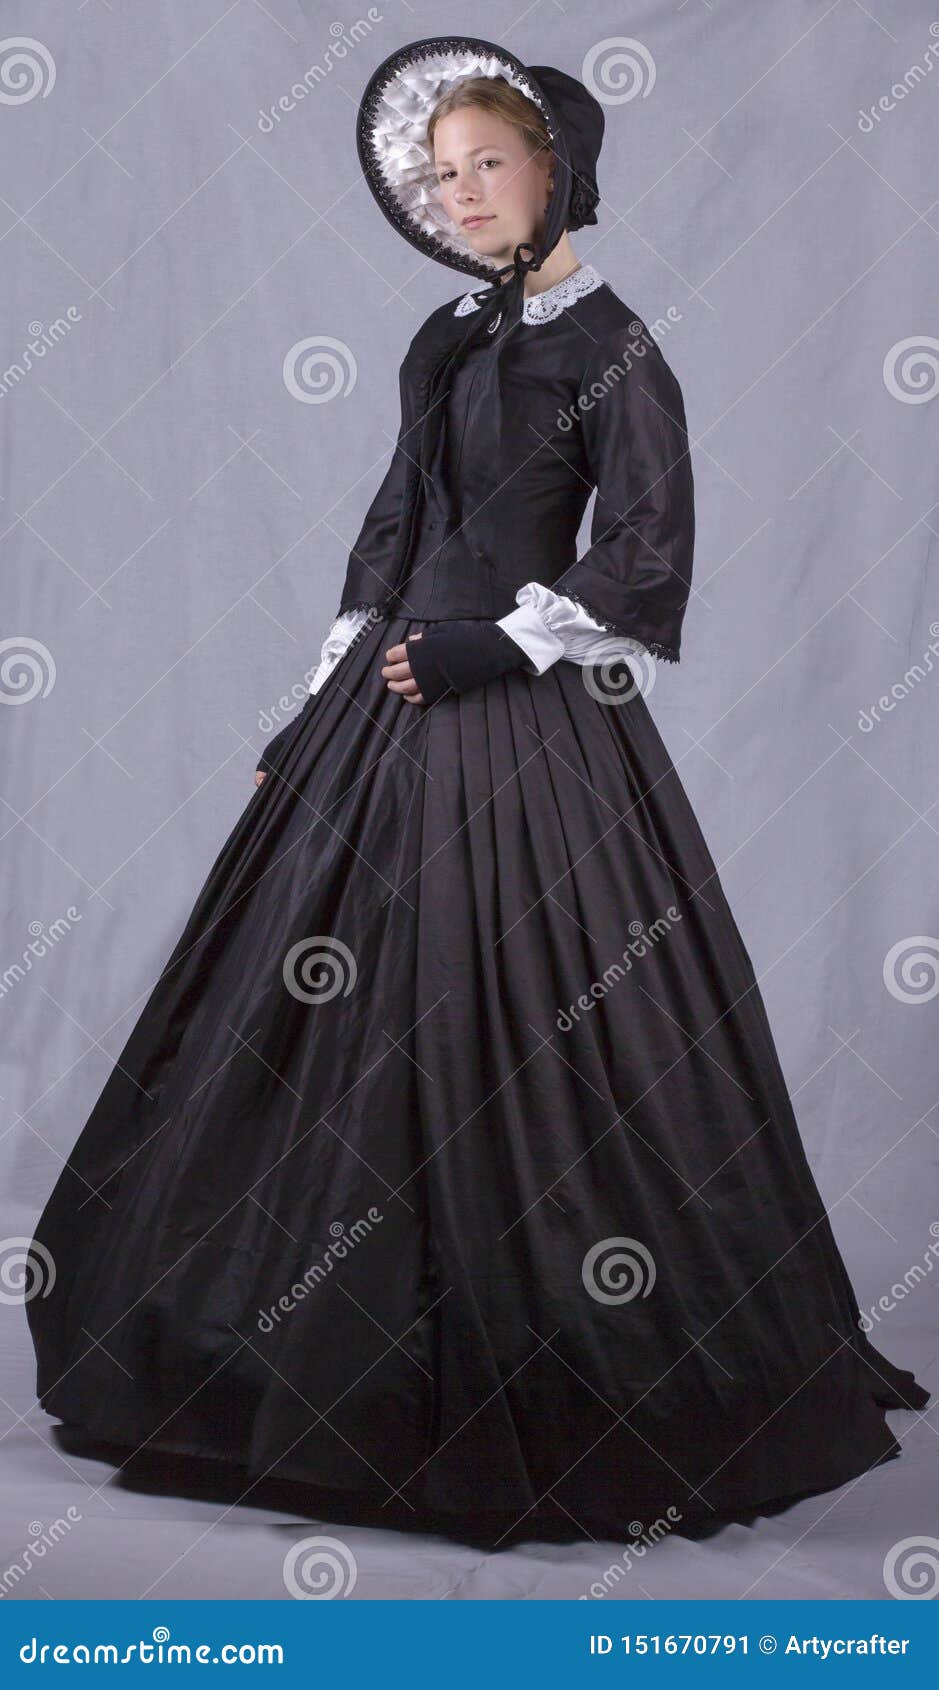 victorian woman in black bodice. bonnet and skirt